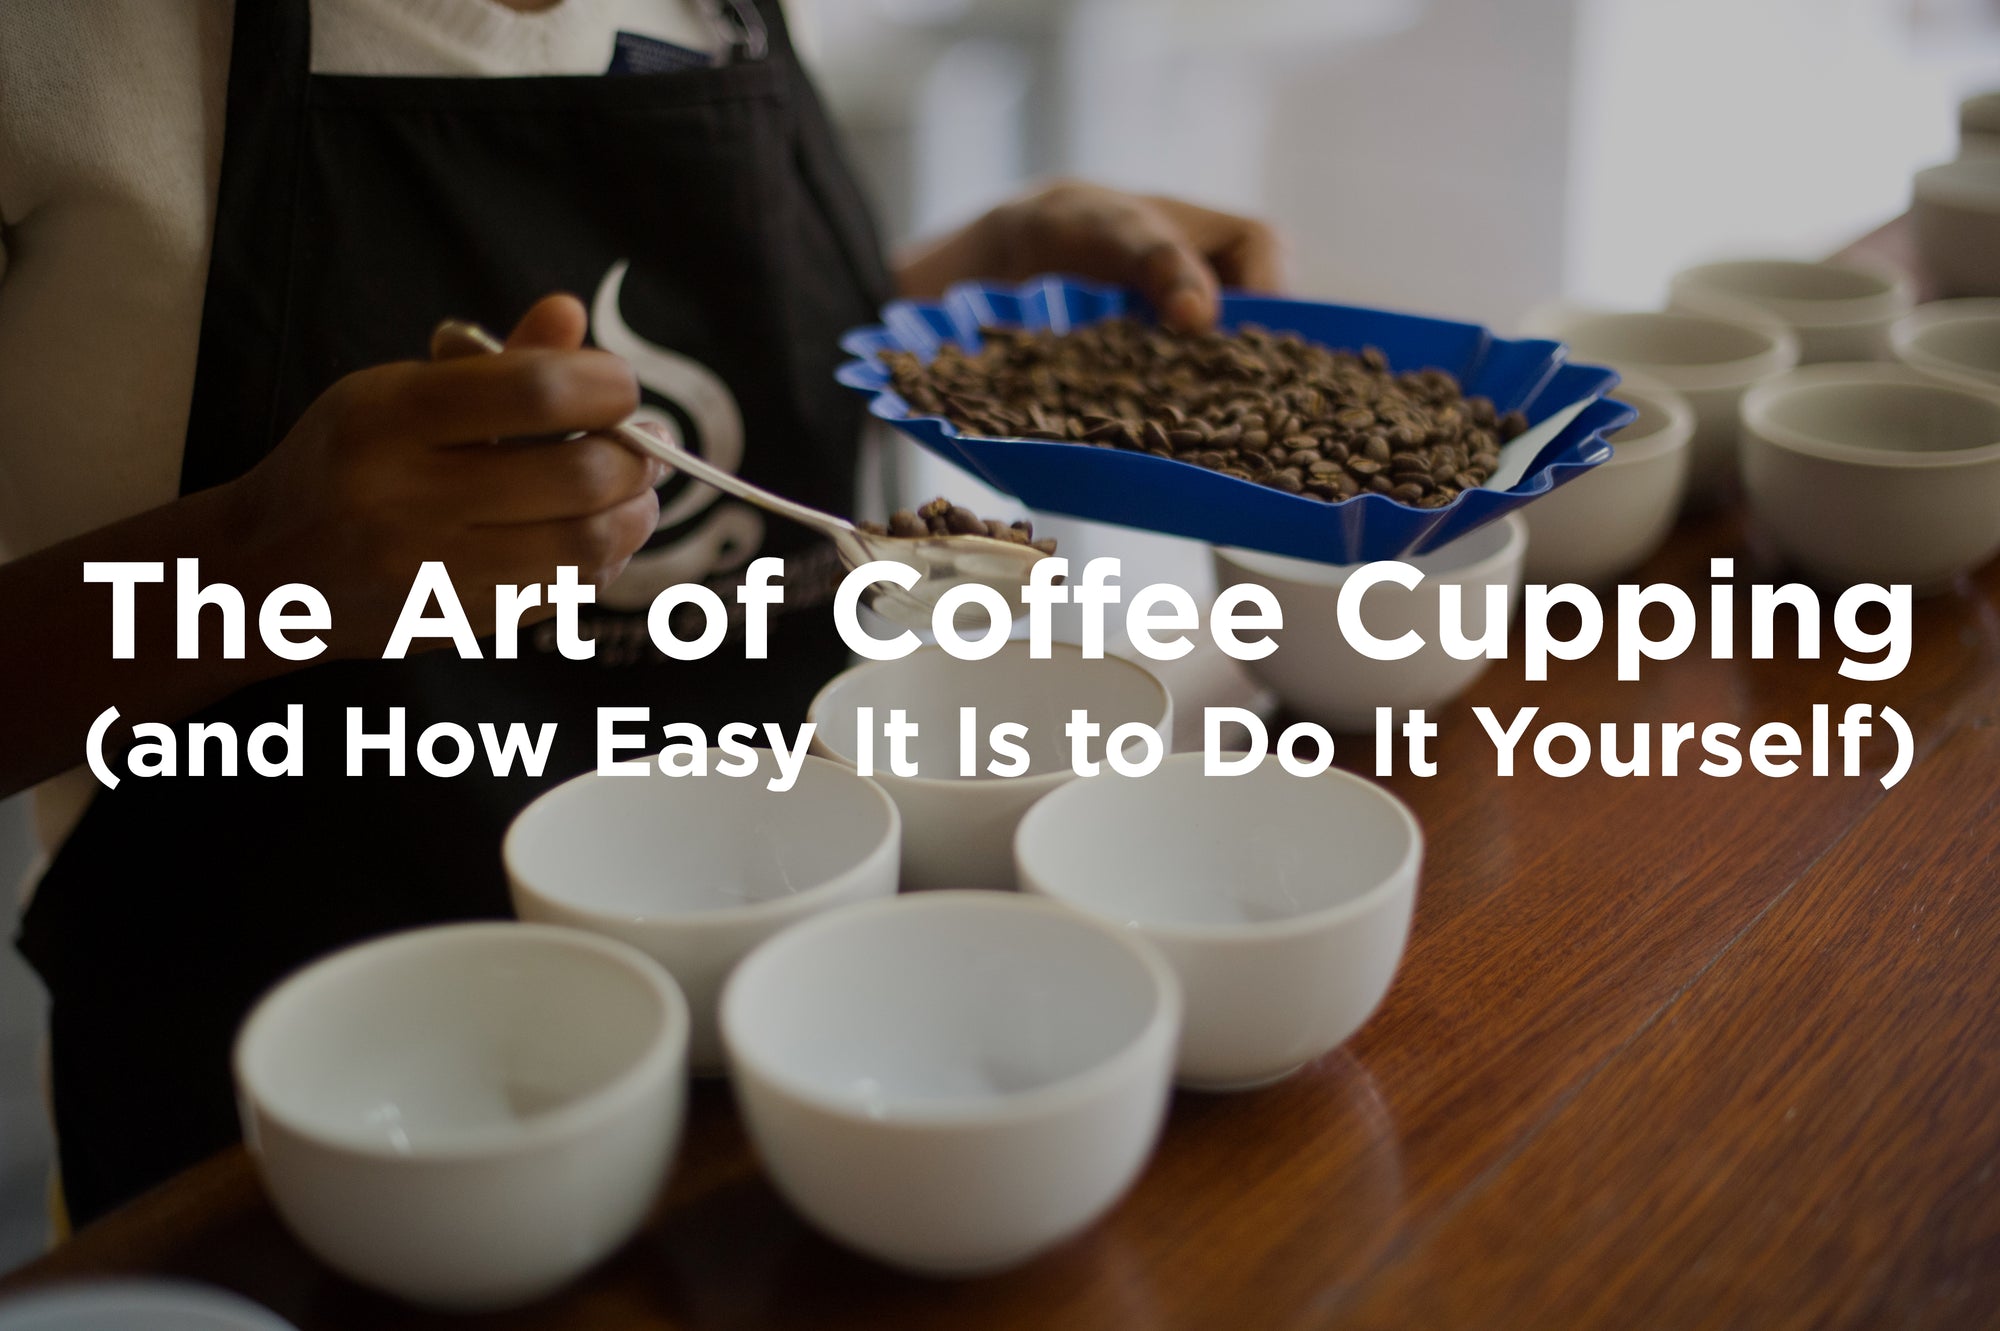 The Art of Coffee Cupping (and How Easy It Is to Do It Yourself)